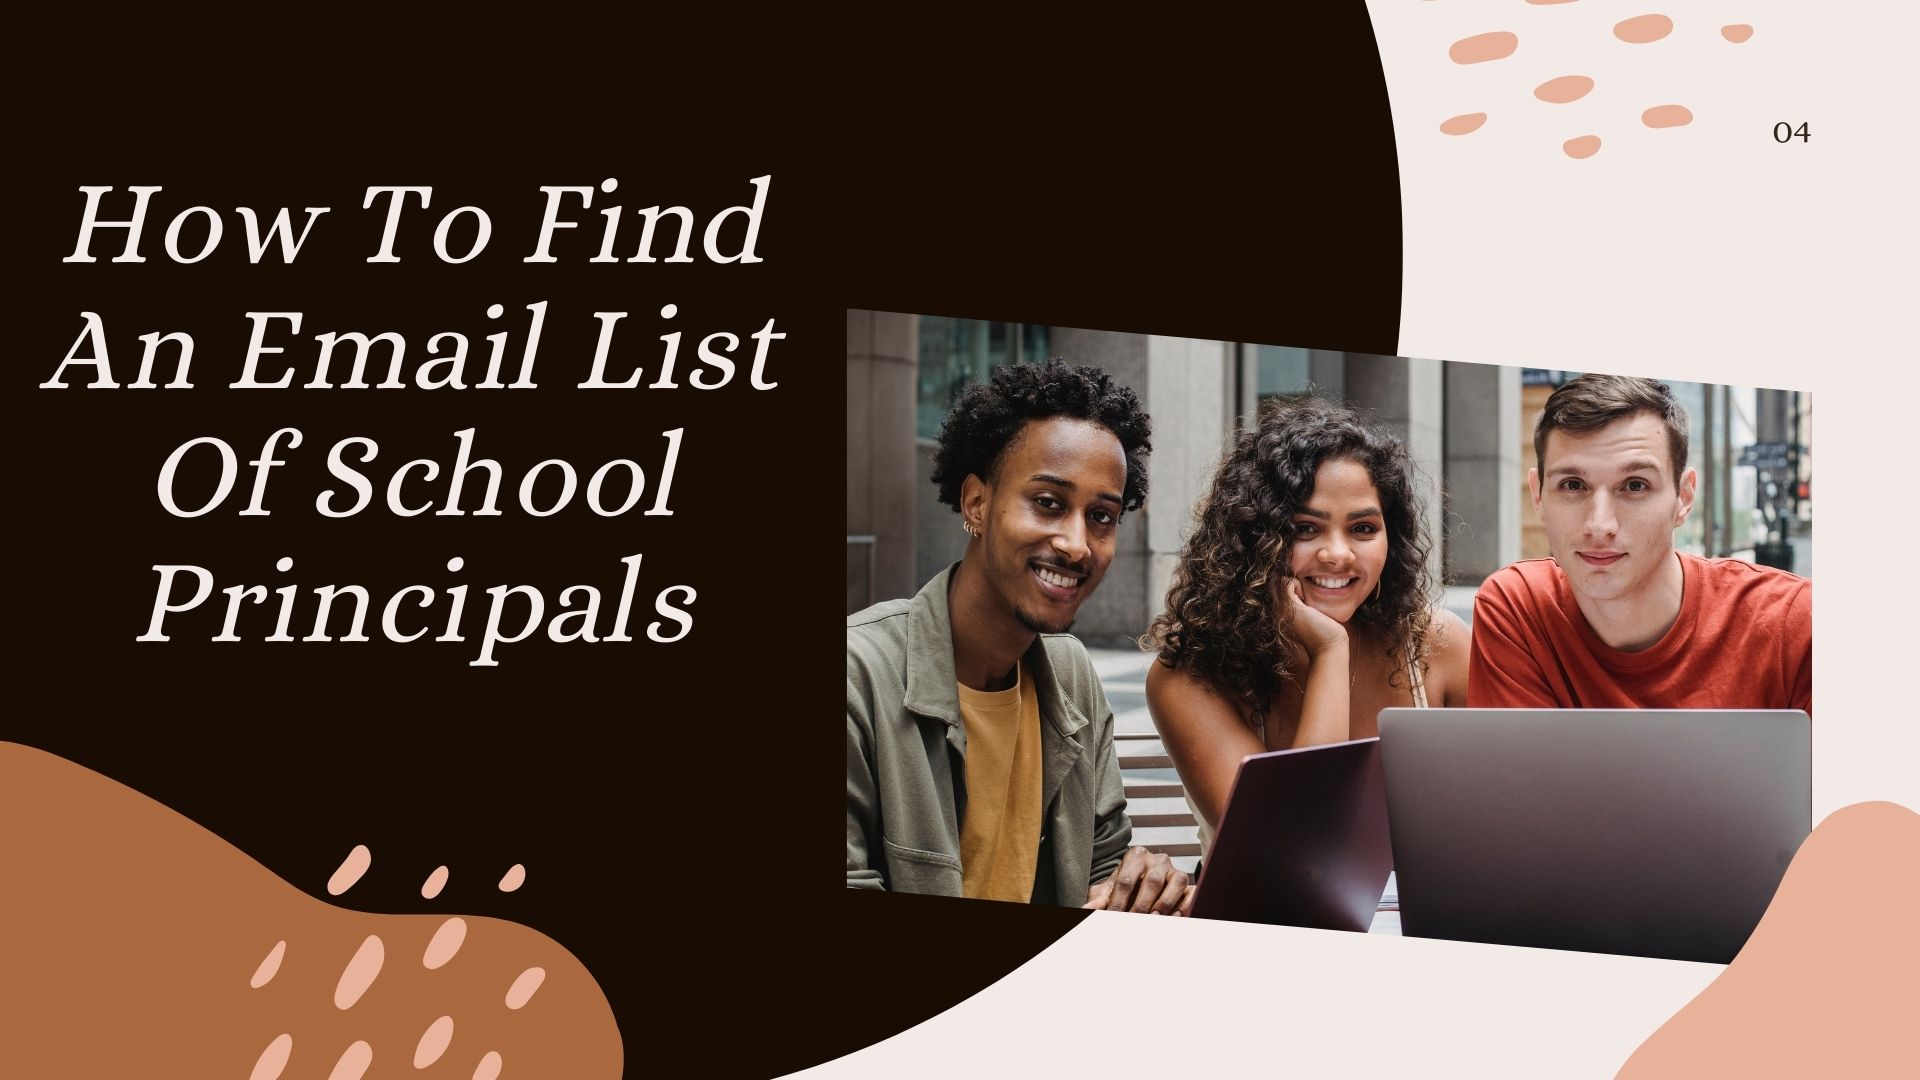 How To Find An Email List Of School Principals